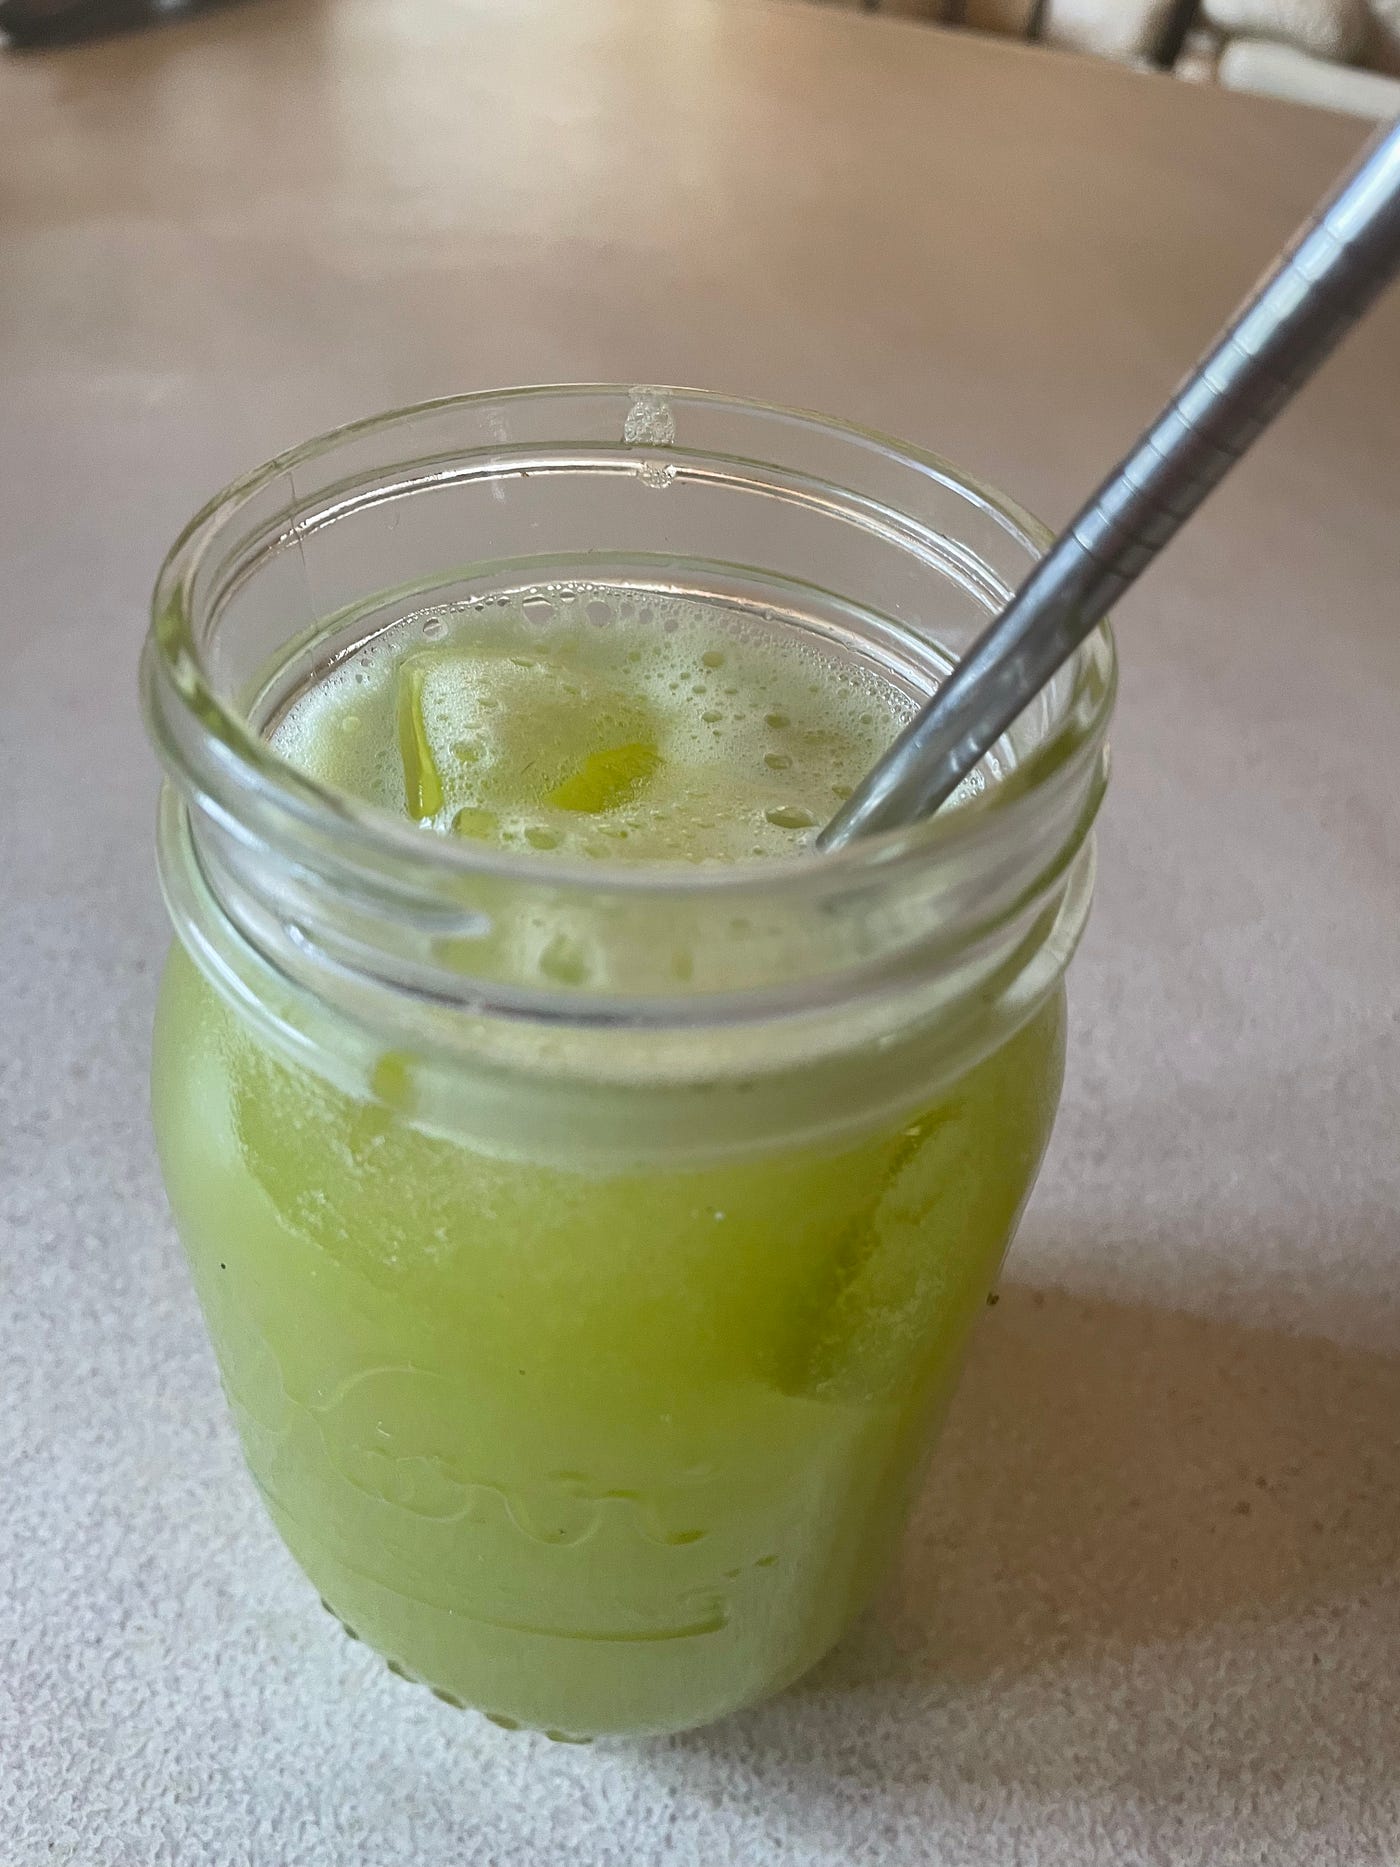 Celery juice in a glass jar with a straw on the counter.